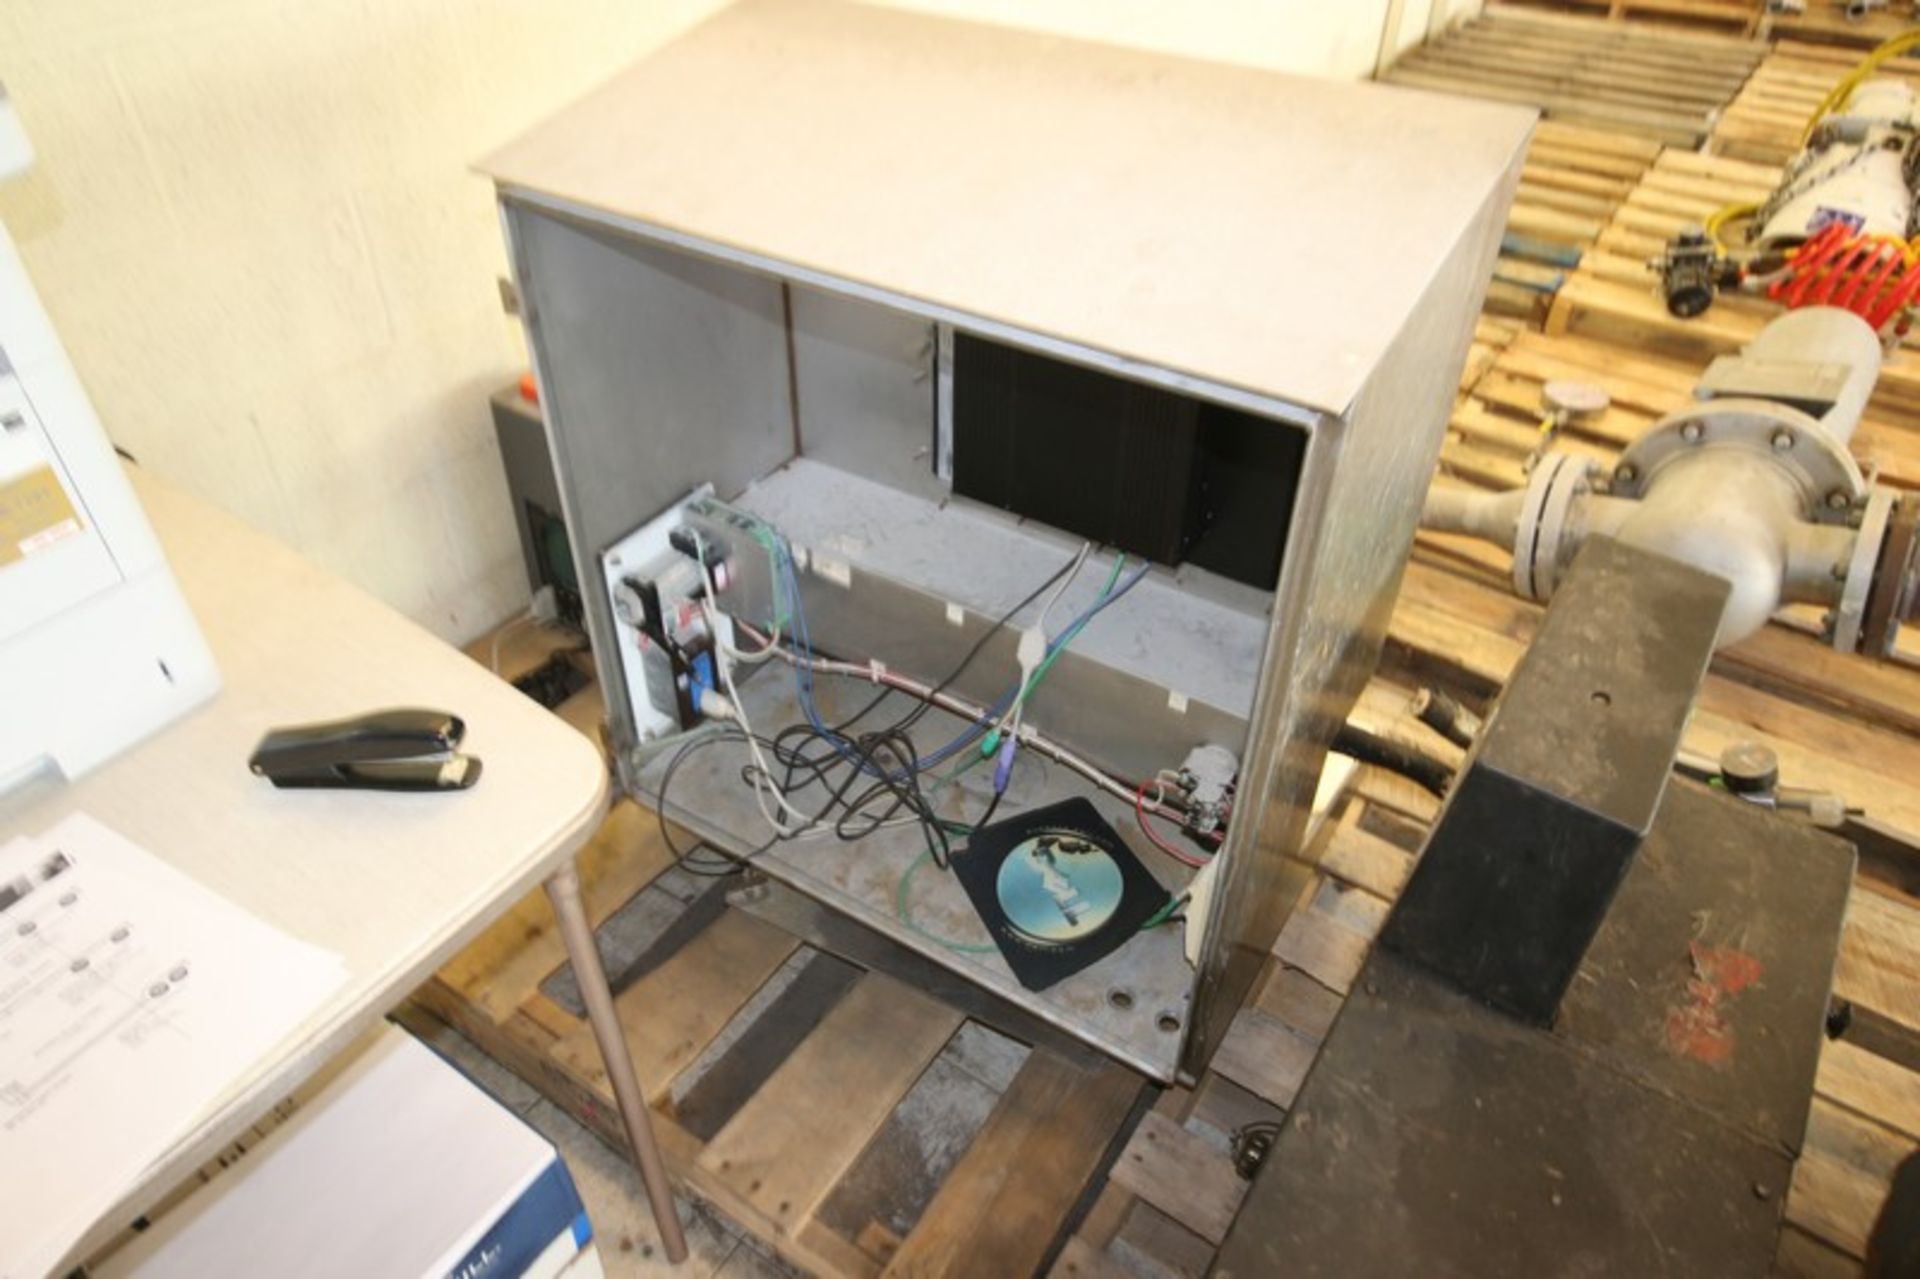 S/S Desk Top Computer Cabinet,with Phoenix Contact Monitor & Key Board (INV#82403) (LOCATED @ MDG - Image 2 of 2